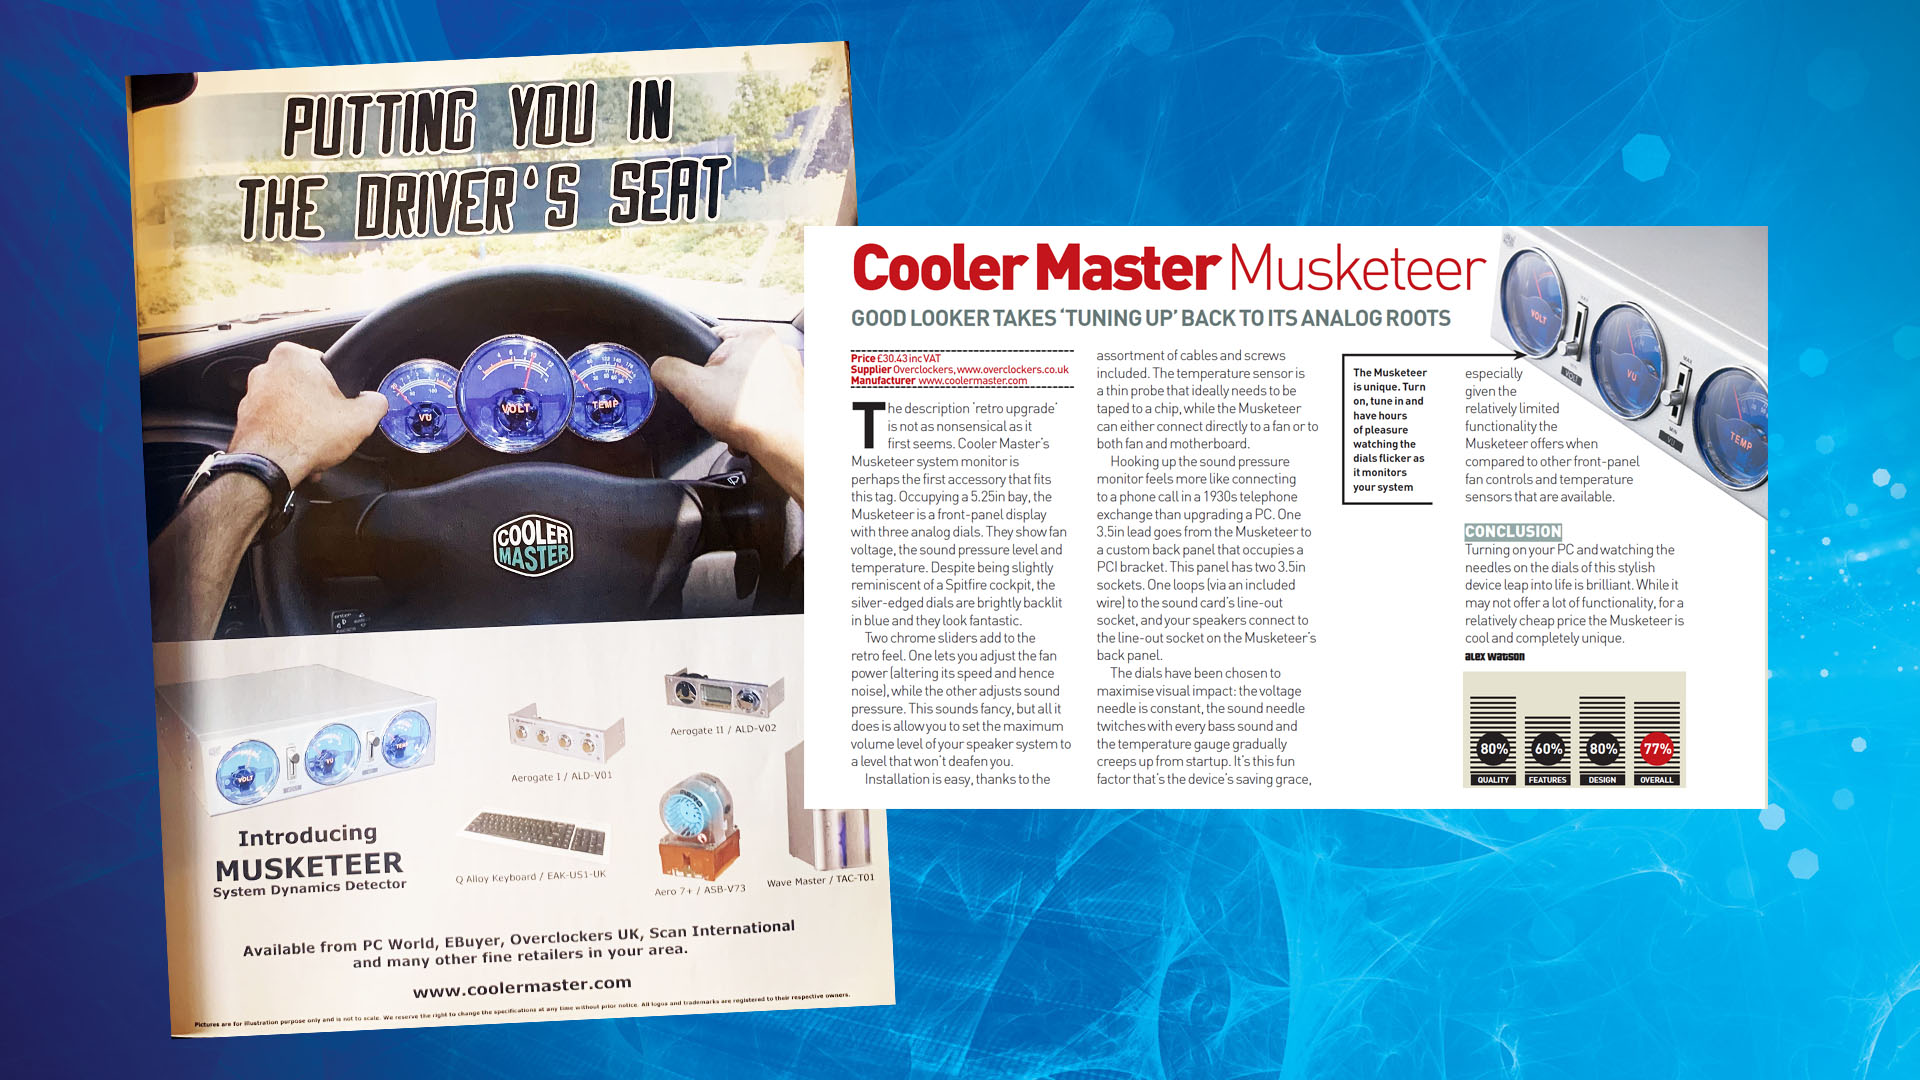 Custom PC magazine Issue 1: Cooler Master Musketeer advert and review